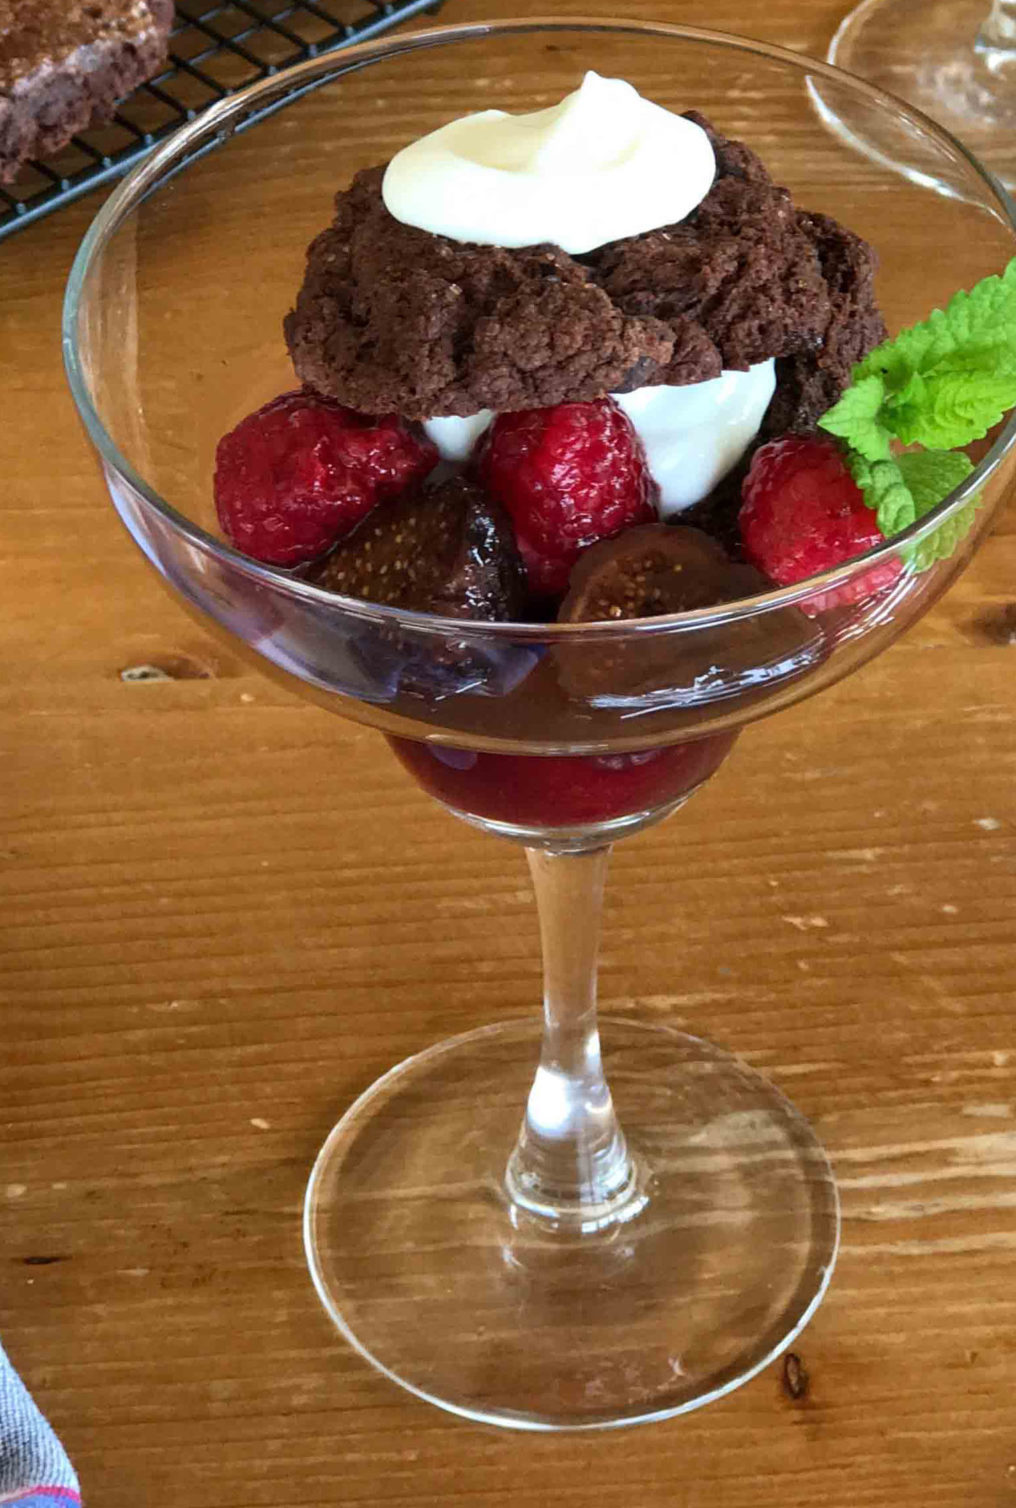 A pretty glass filled with chocolate shortcake with raspberries and figs. Learn how to make the fig compote recipe too.